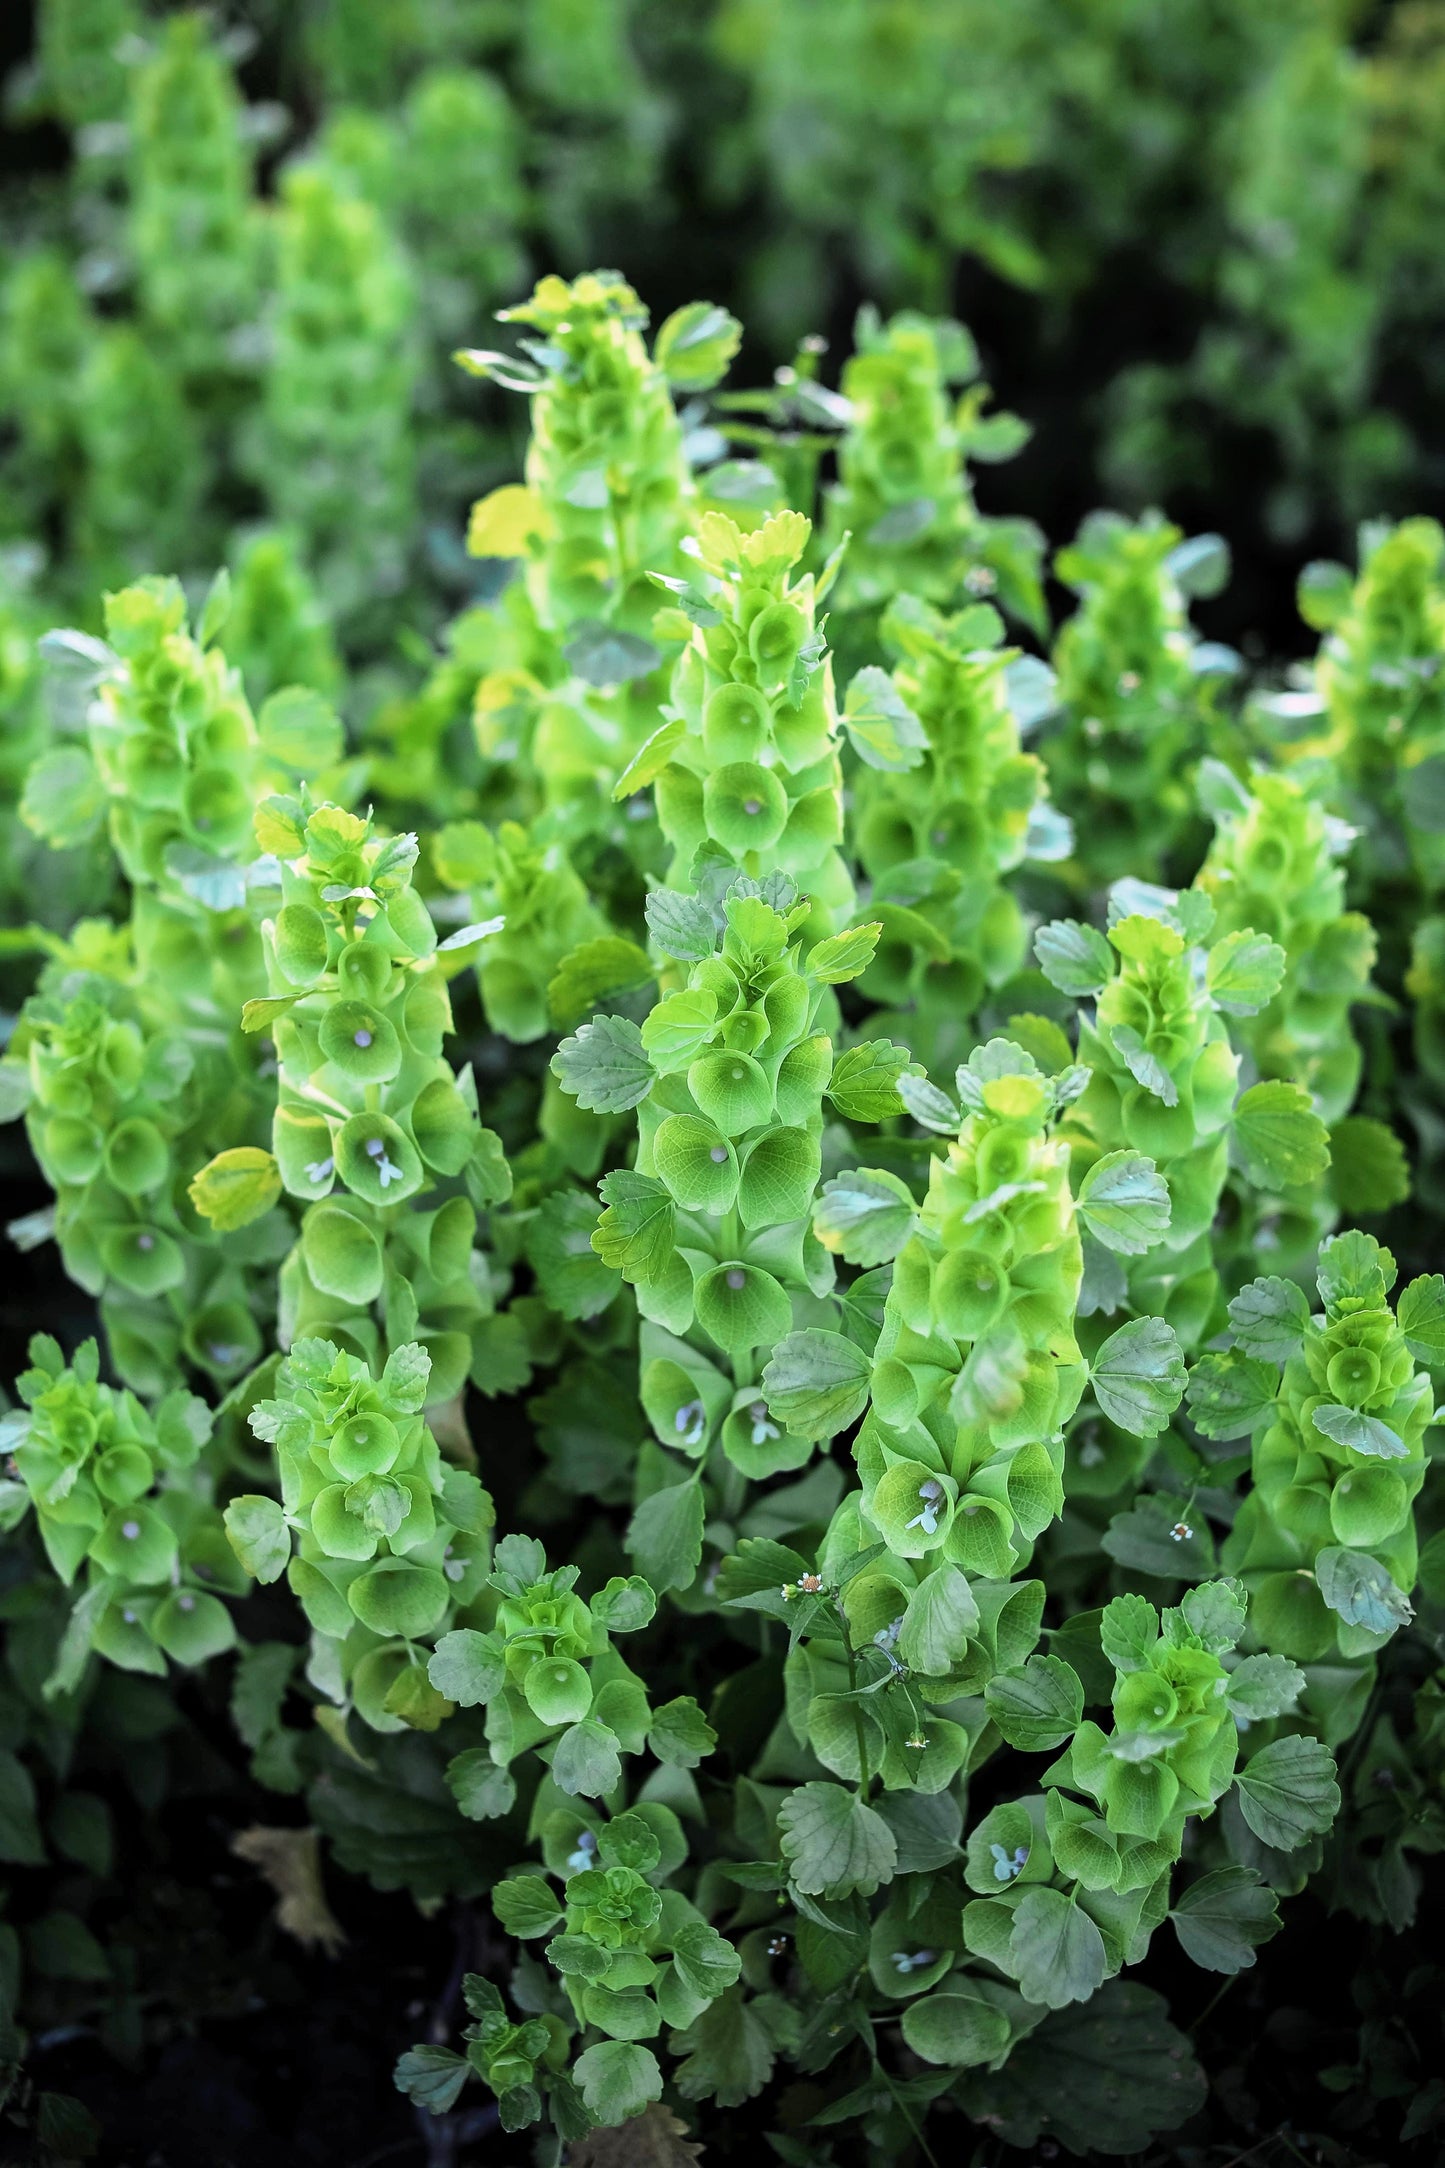 150 BELLS OF IRELAND ( Lady In The Bathtub / Shell Flower ) Moluccella Laevis Green Flower Seeds